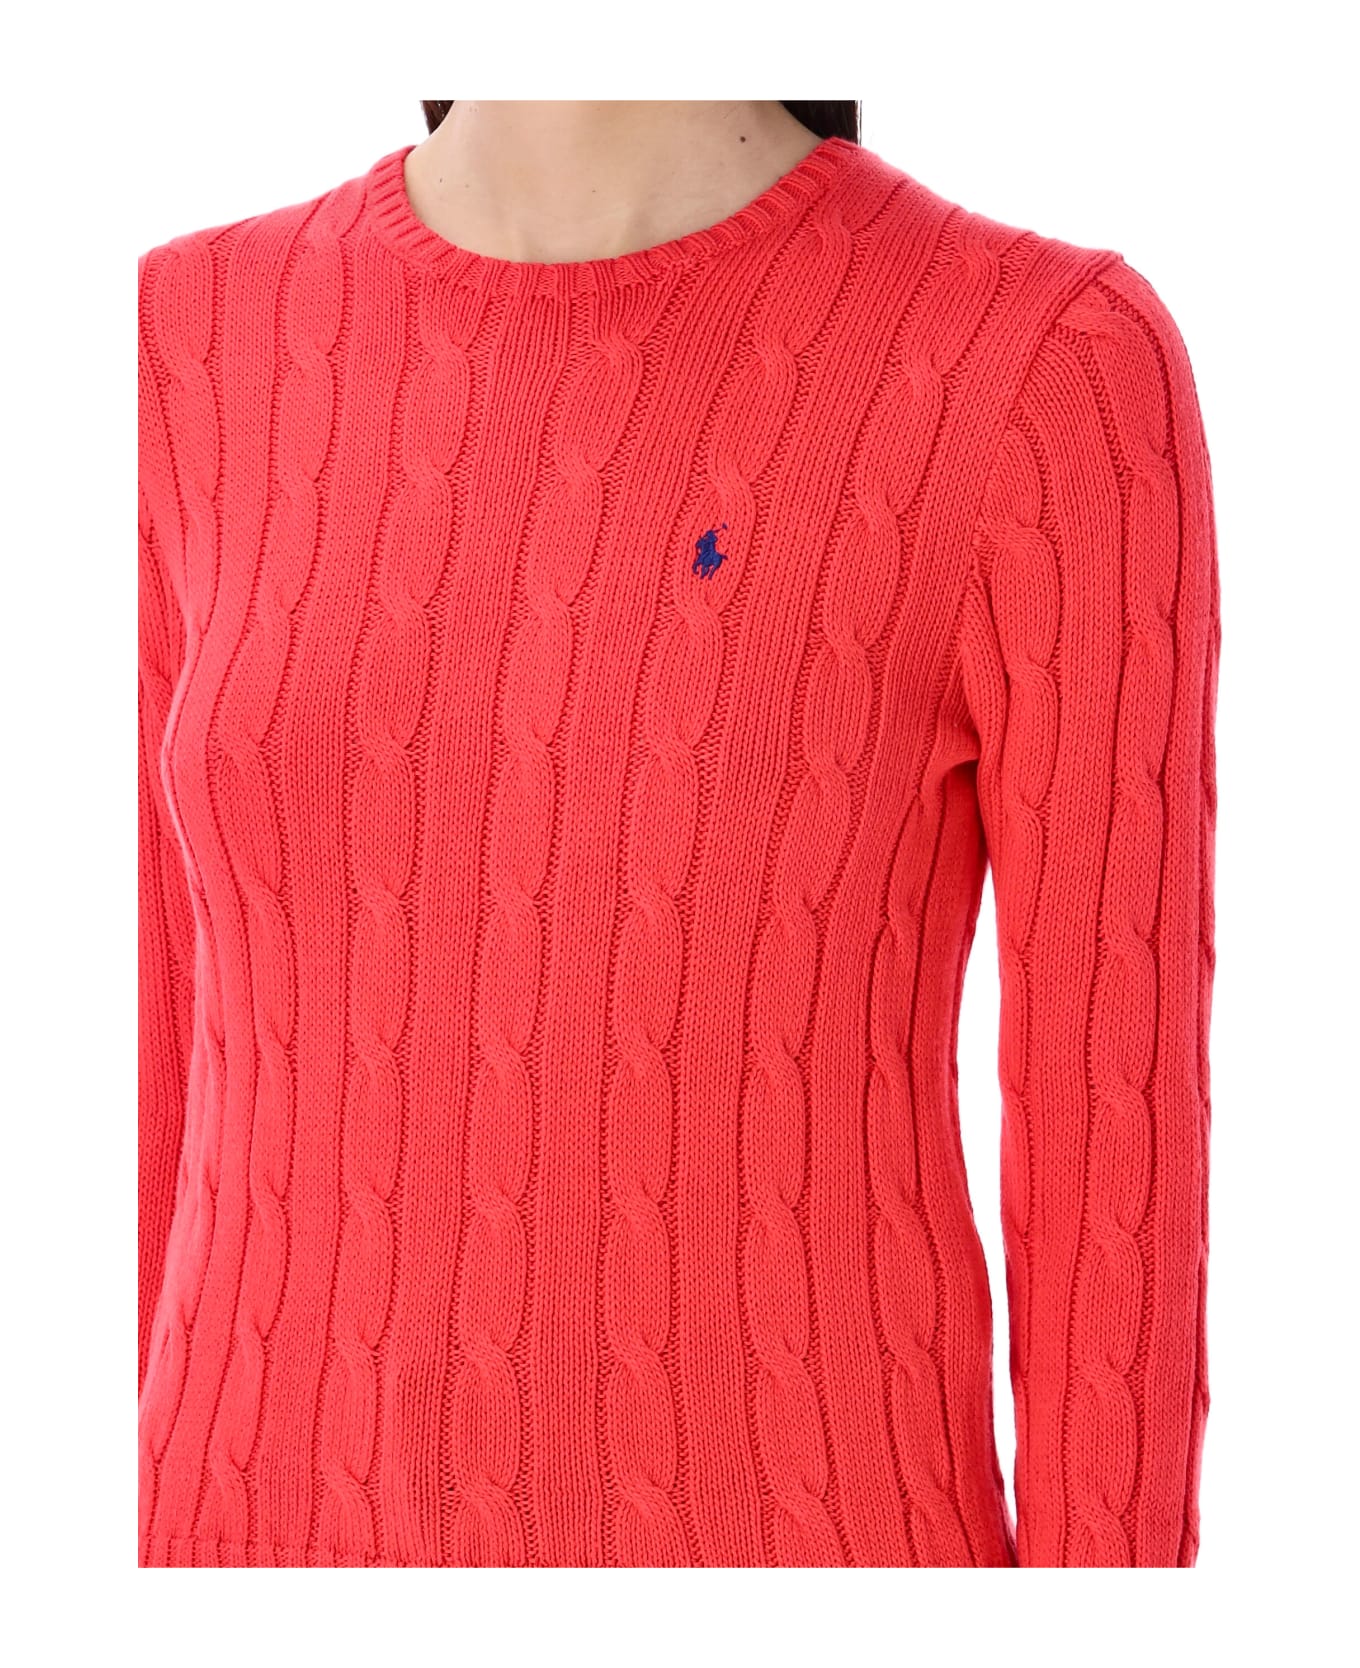 Polo Ralph Lauren Cable-knit Cotton Crewneck Sweater - IBISCUS RED